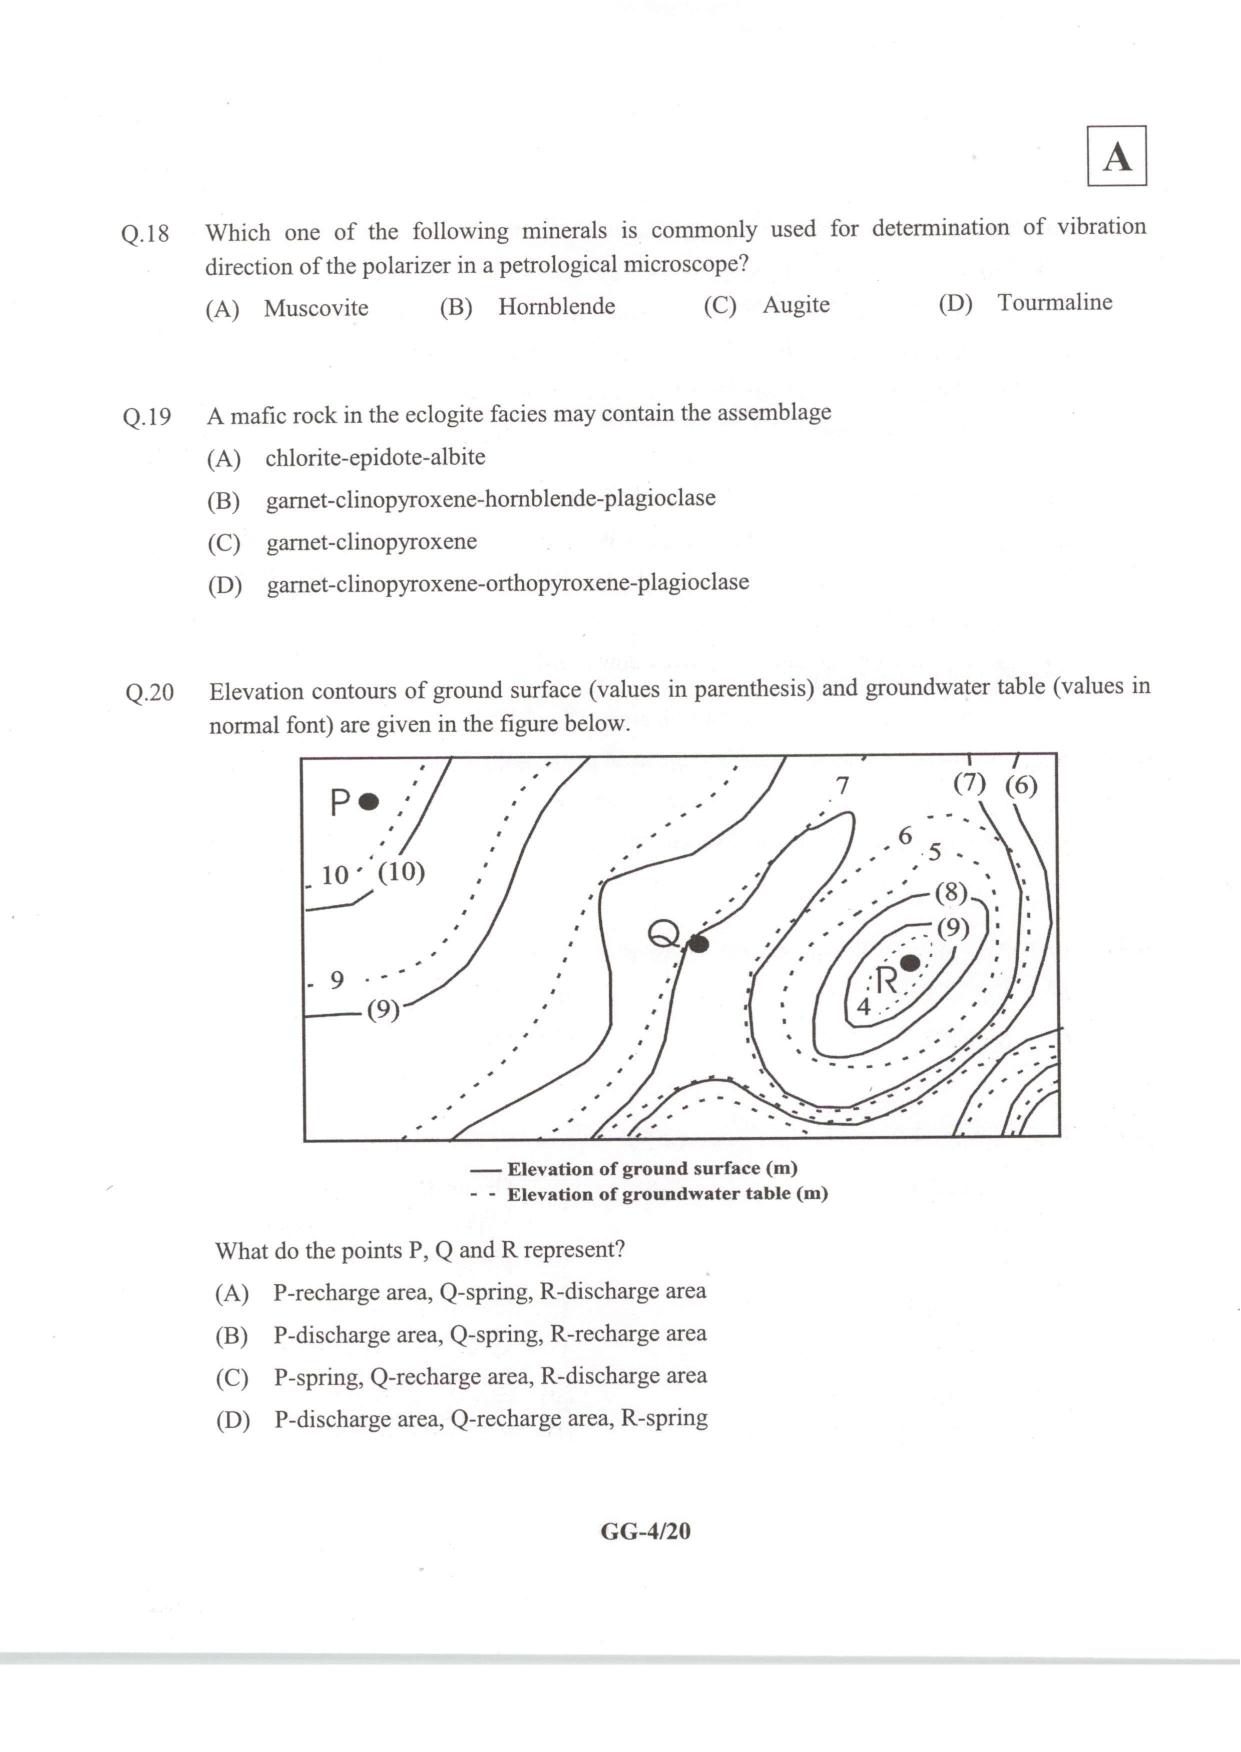 JAM 2014: GG Question Paper - Page 6